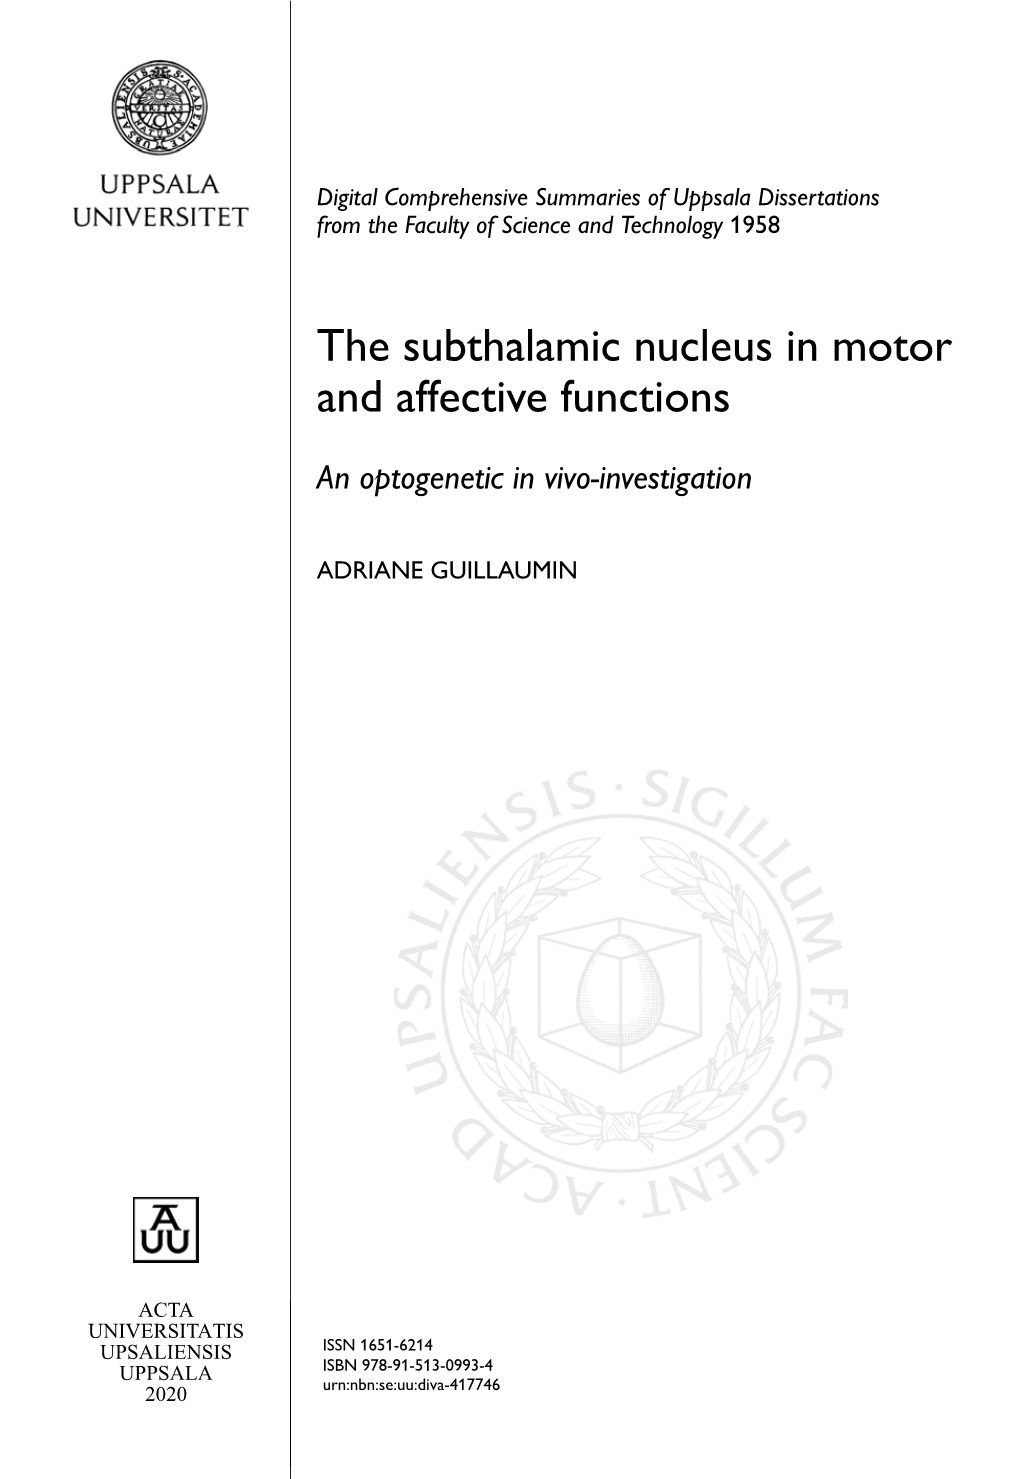 The Subthalamic Nucleus in Motor and Affective Functions